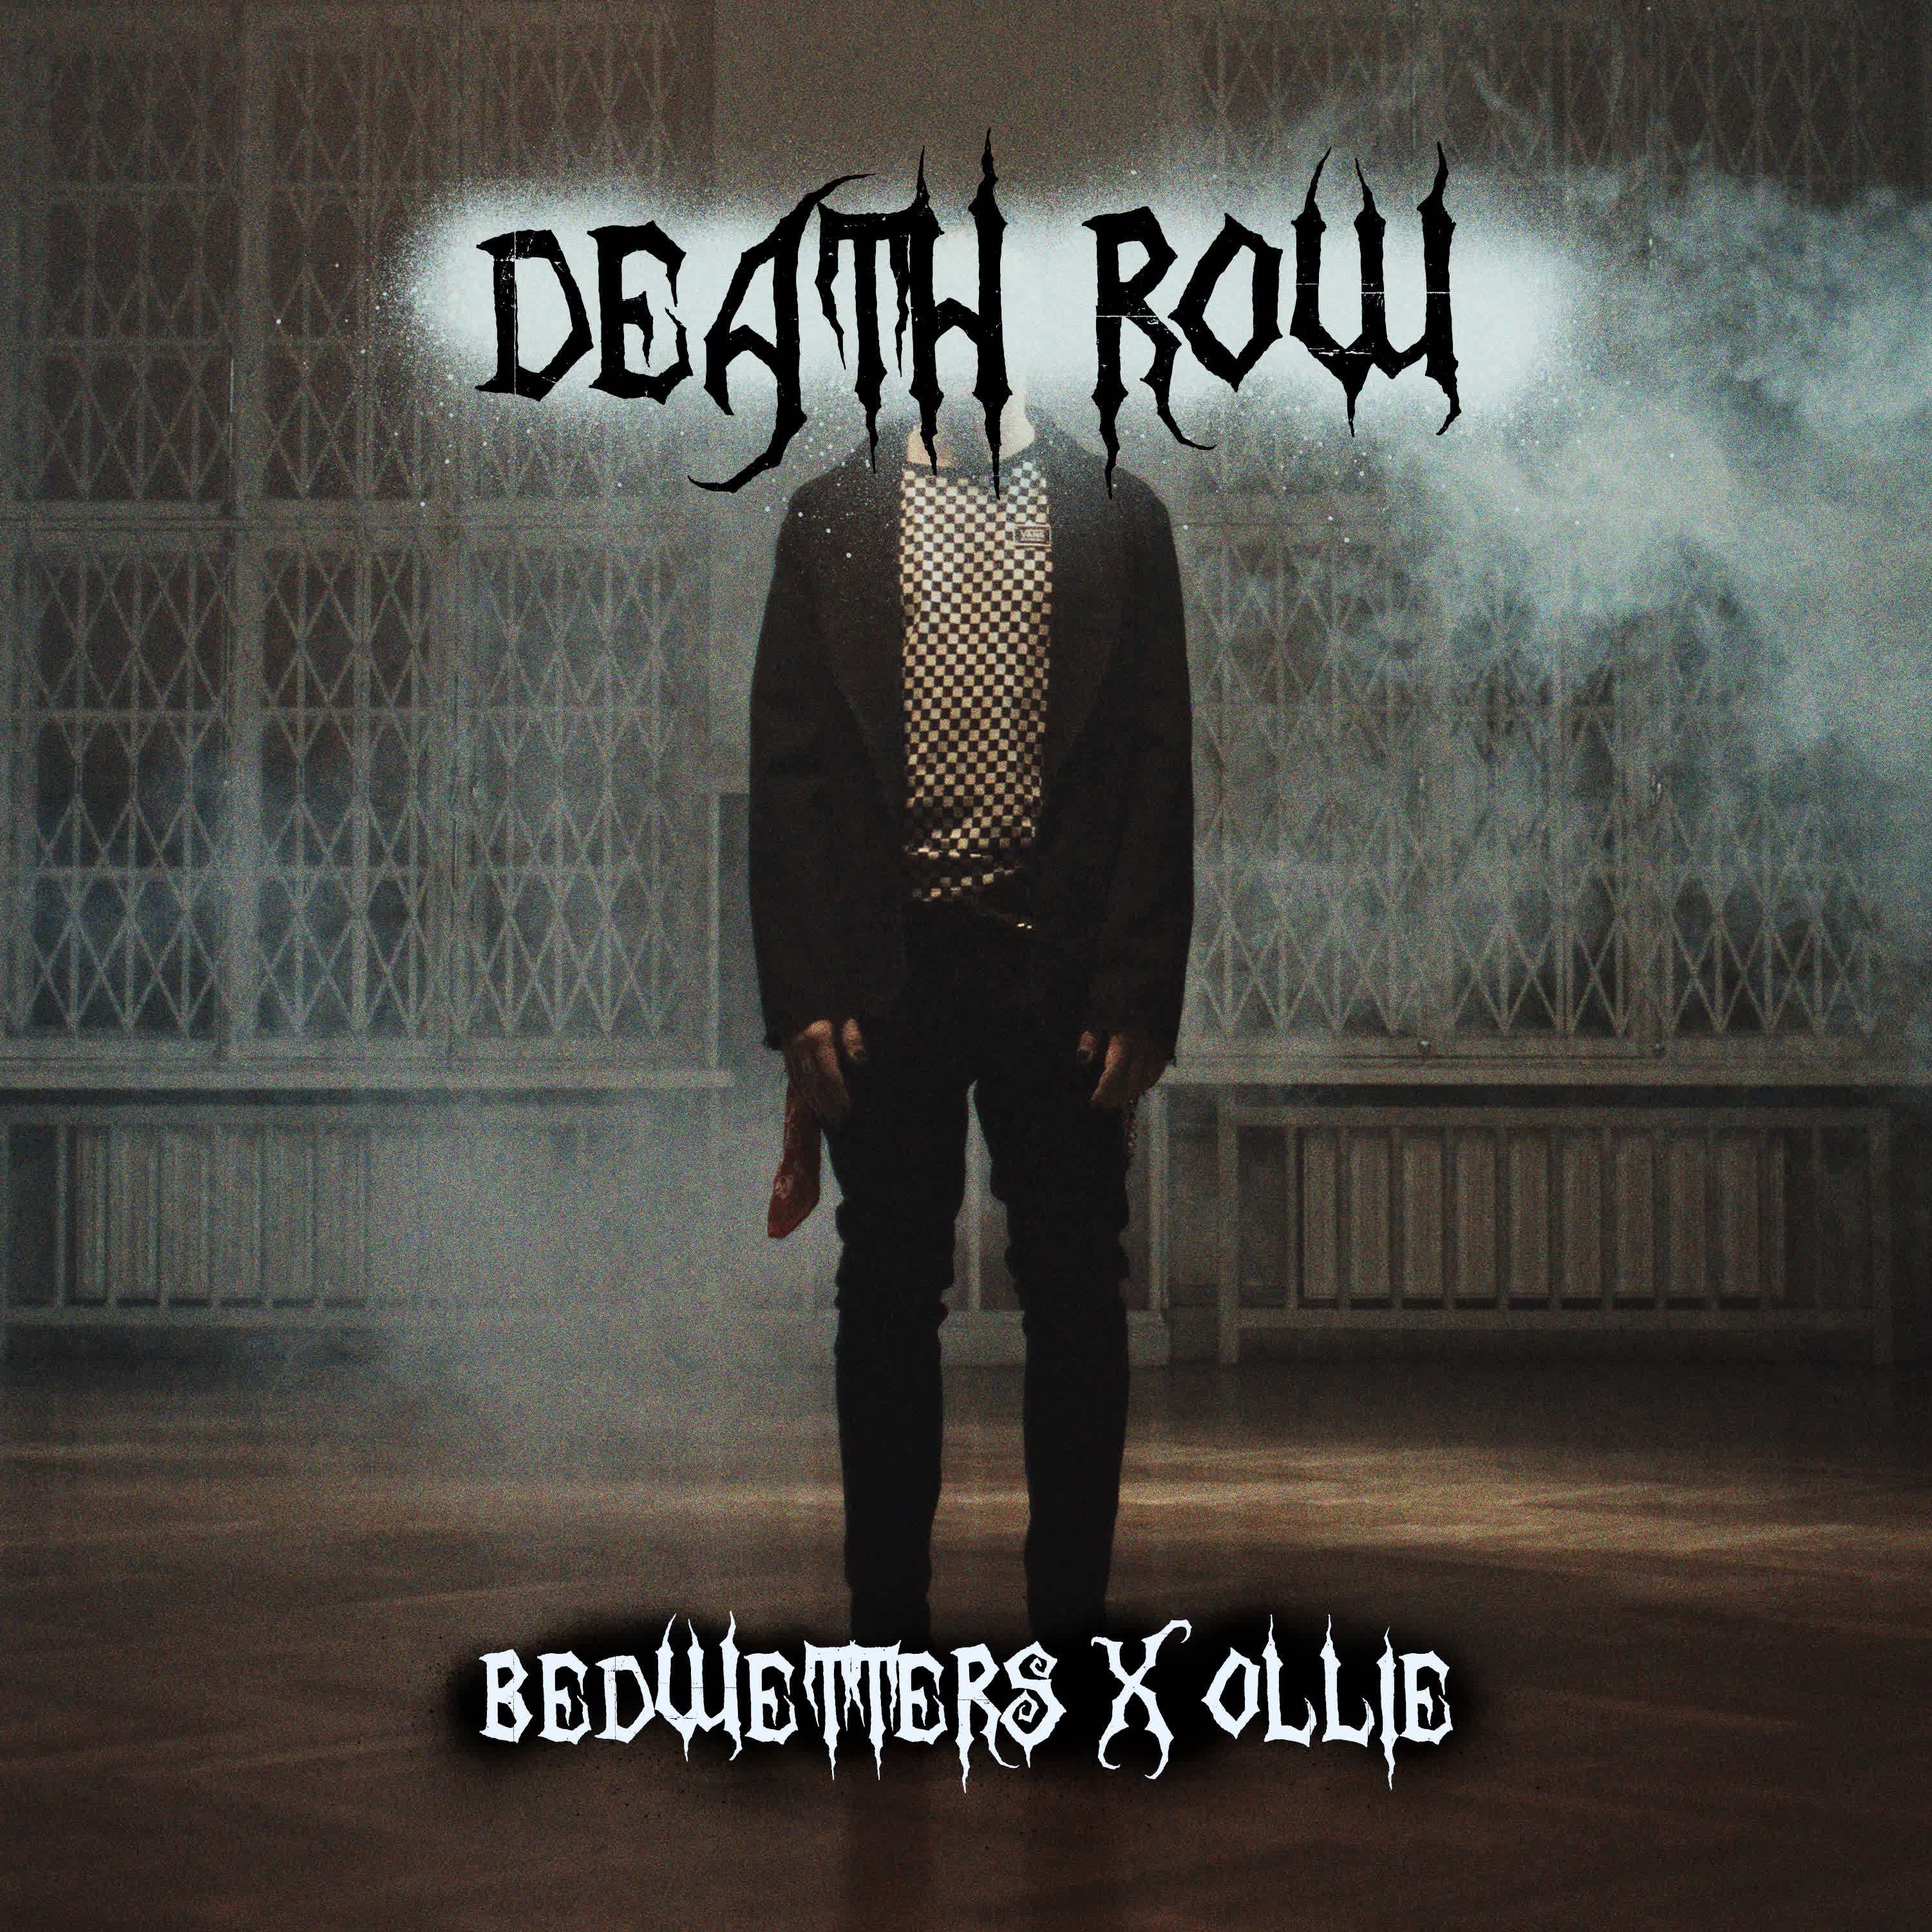 Bedwetters - Death Row (feat. ollie)